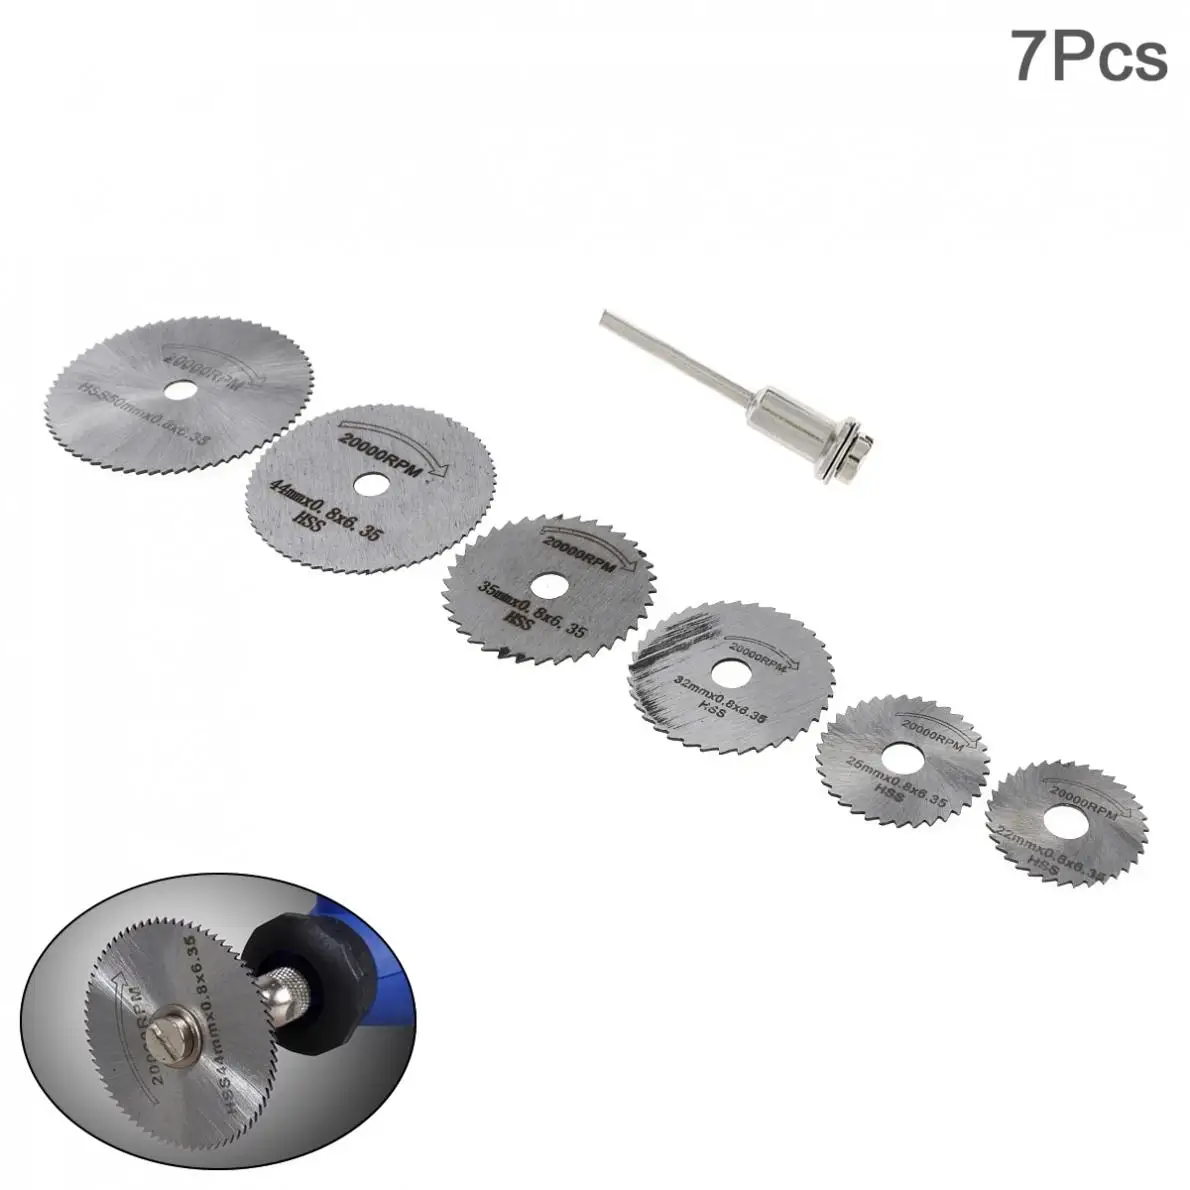 7pcs/lot Mini Wood Saw Blade Circular Blade Jig Saw Rotary Tool for Cutter Power Tool Set Wood Cutting Discs coofix 950w laser jig saw variable speed multifunctional woodworking power tool multifunctional jig saw 10 blade saw blade